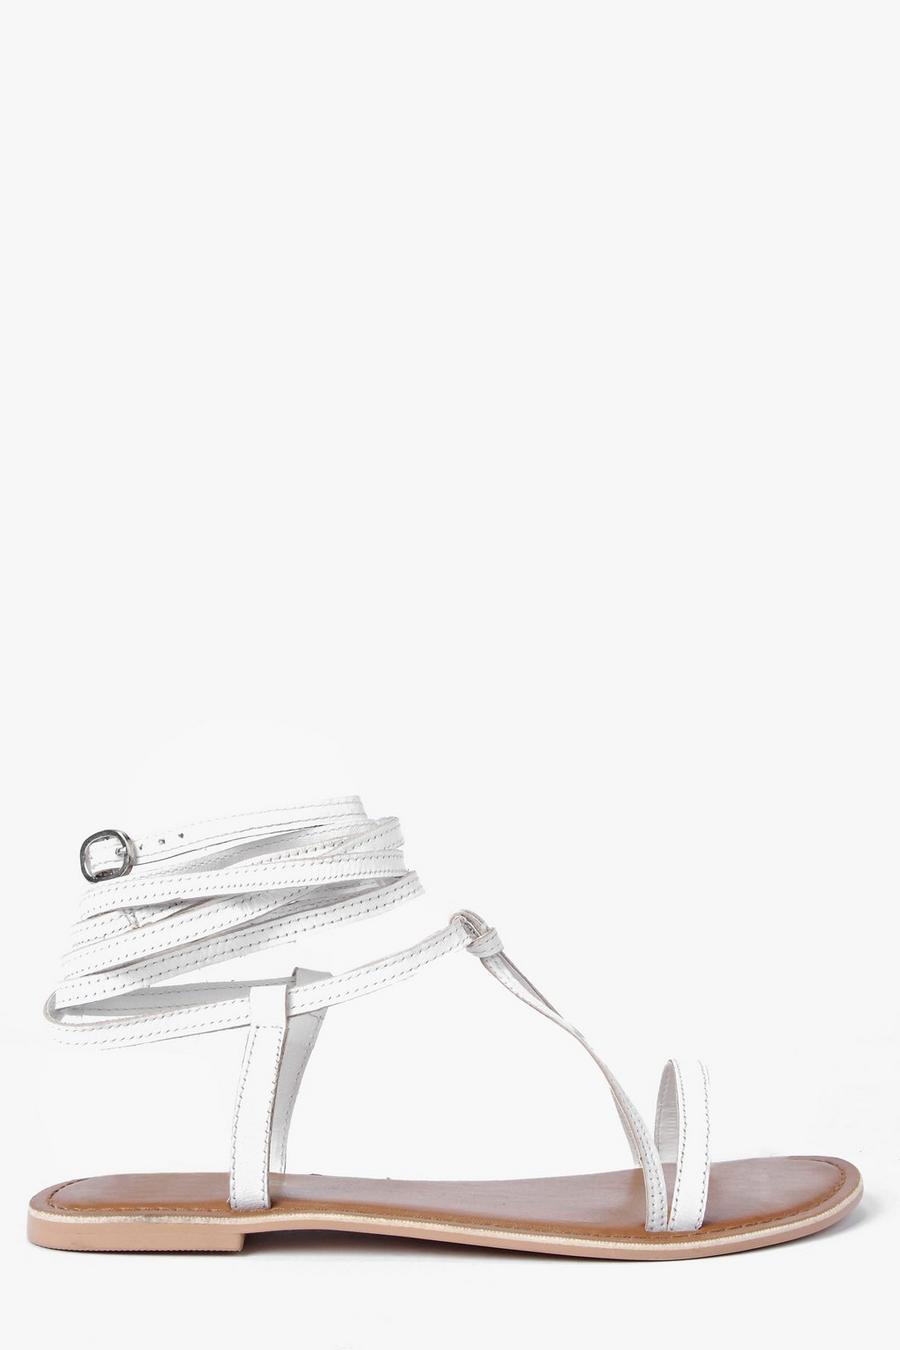 White Boutique Wrap Strap Leather Ghillie Sandals image number 1